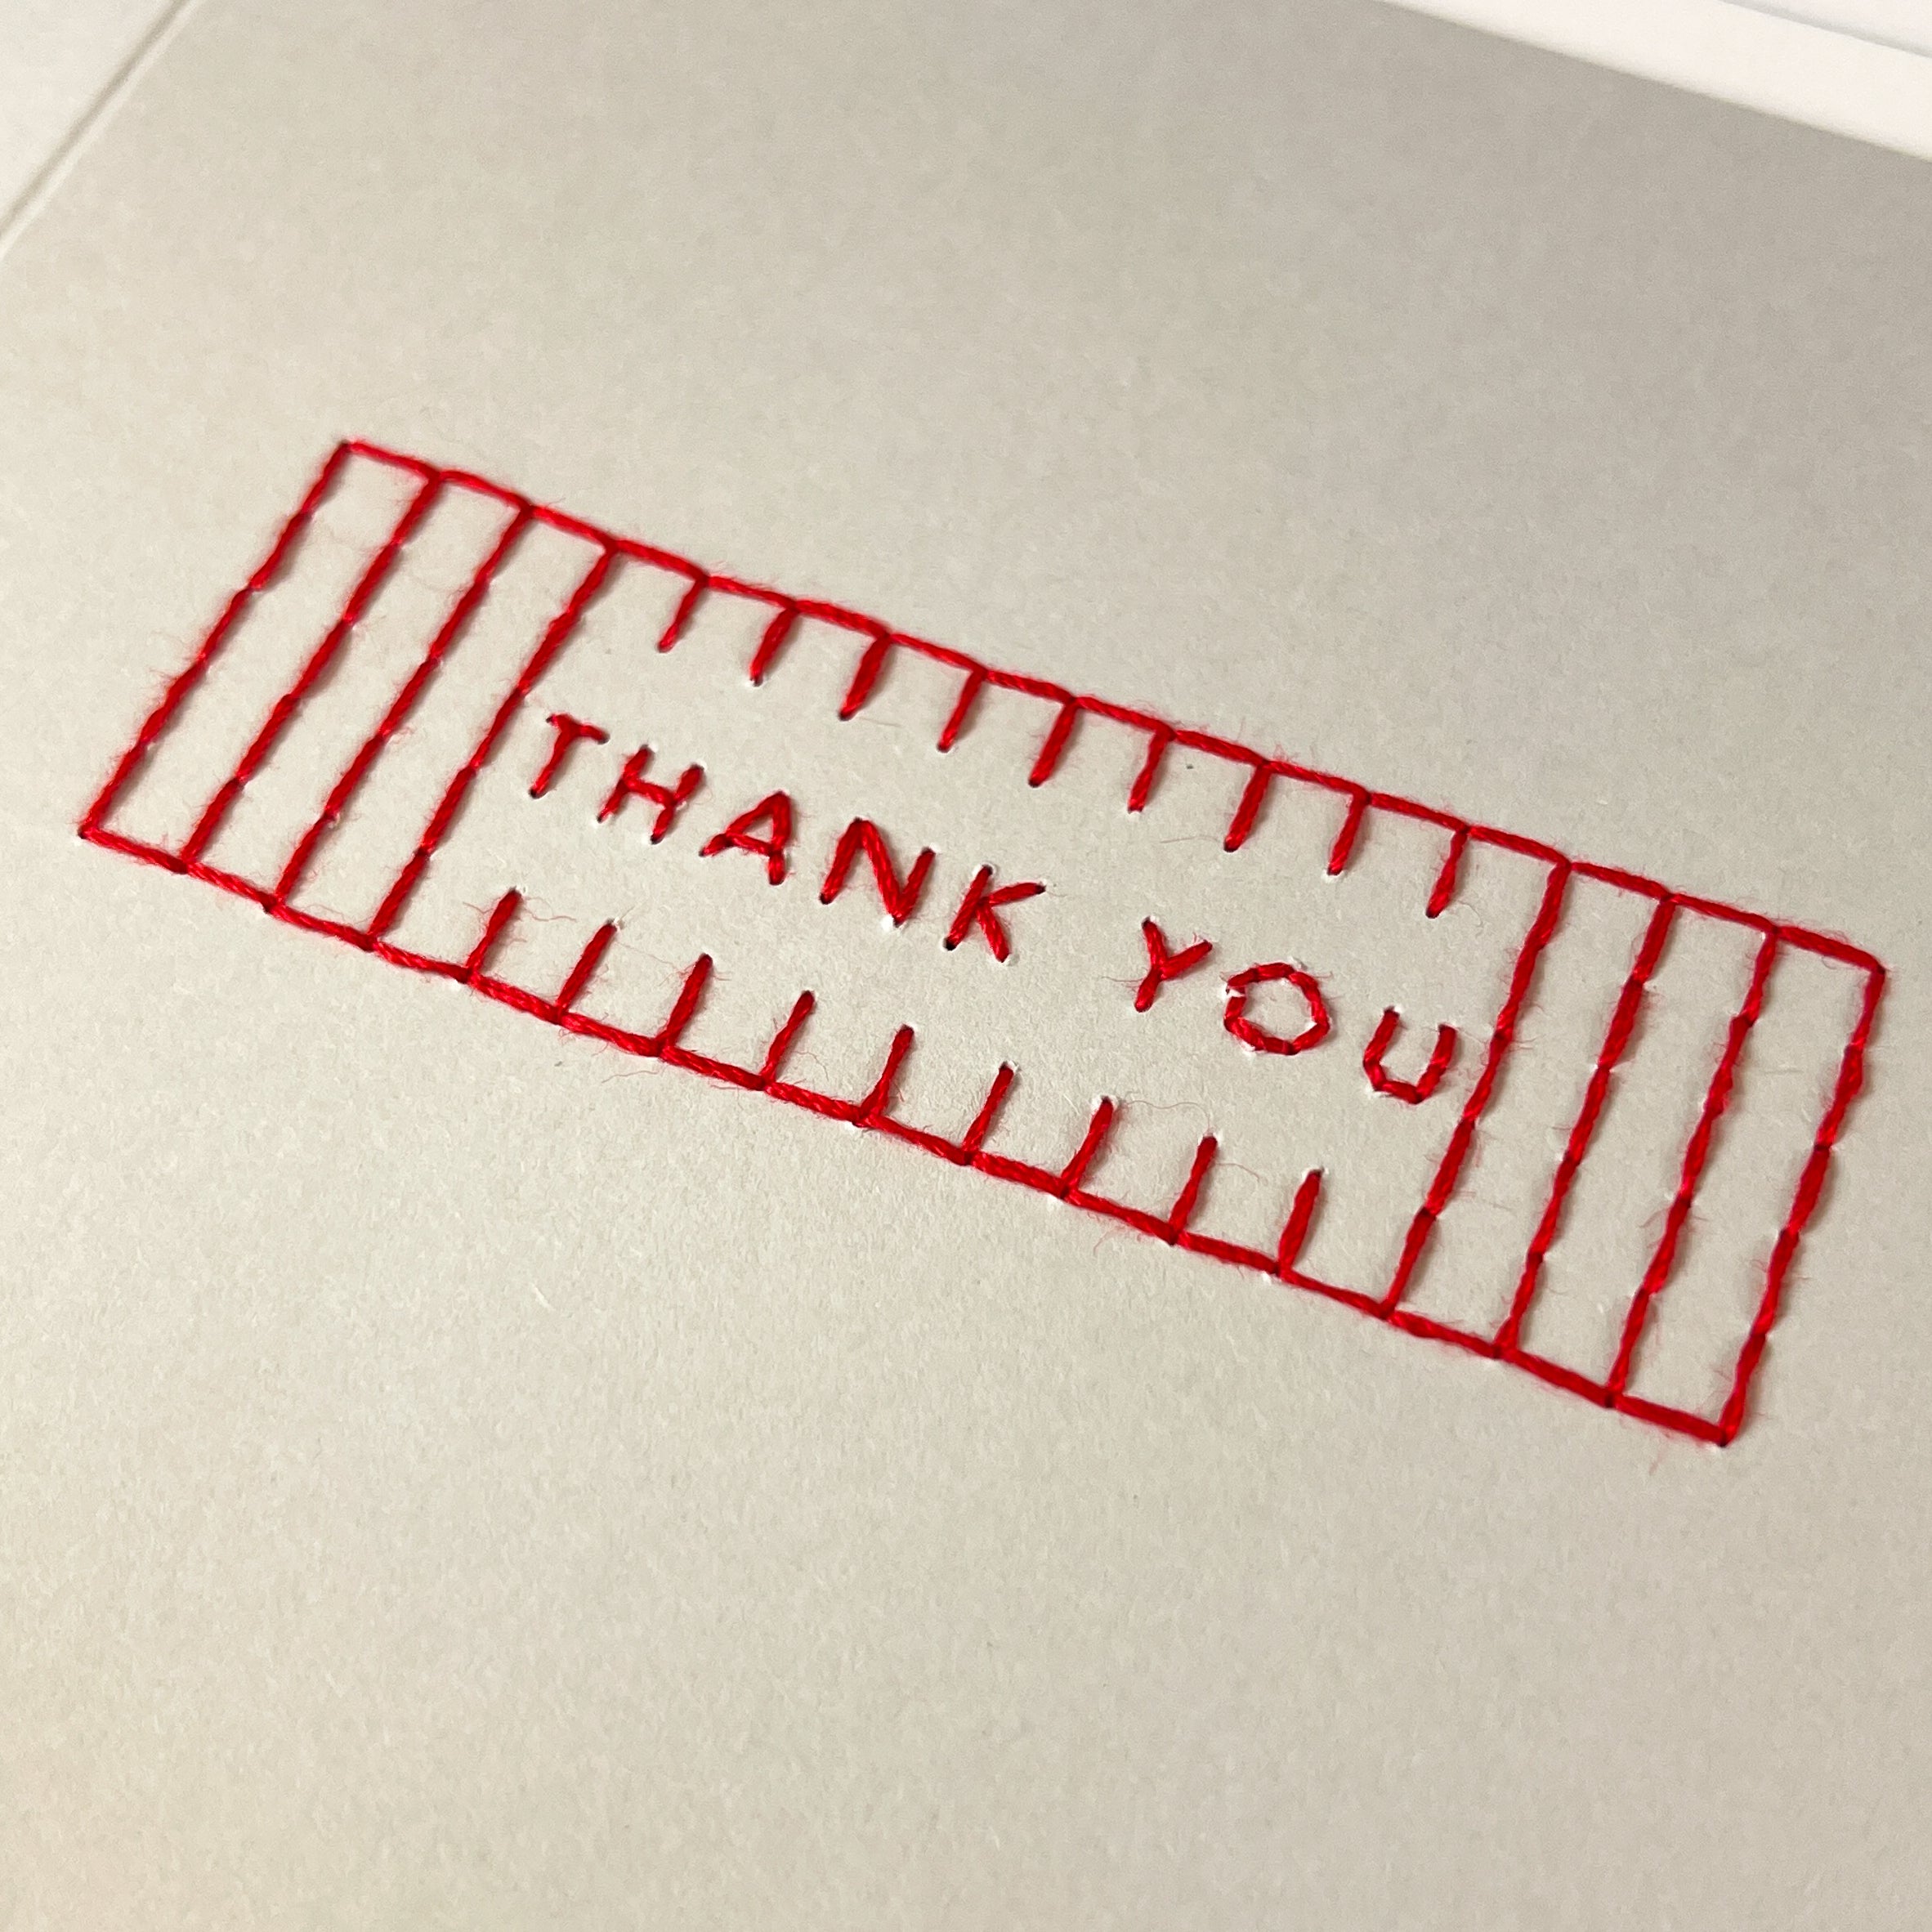 'Thank you' Card